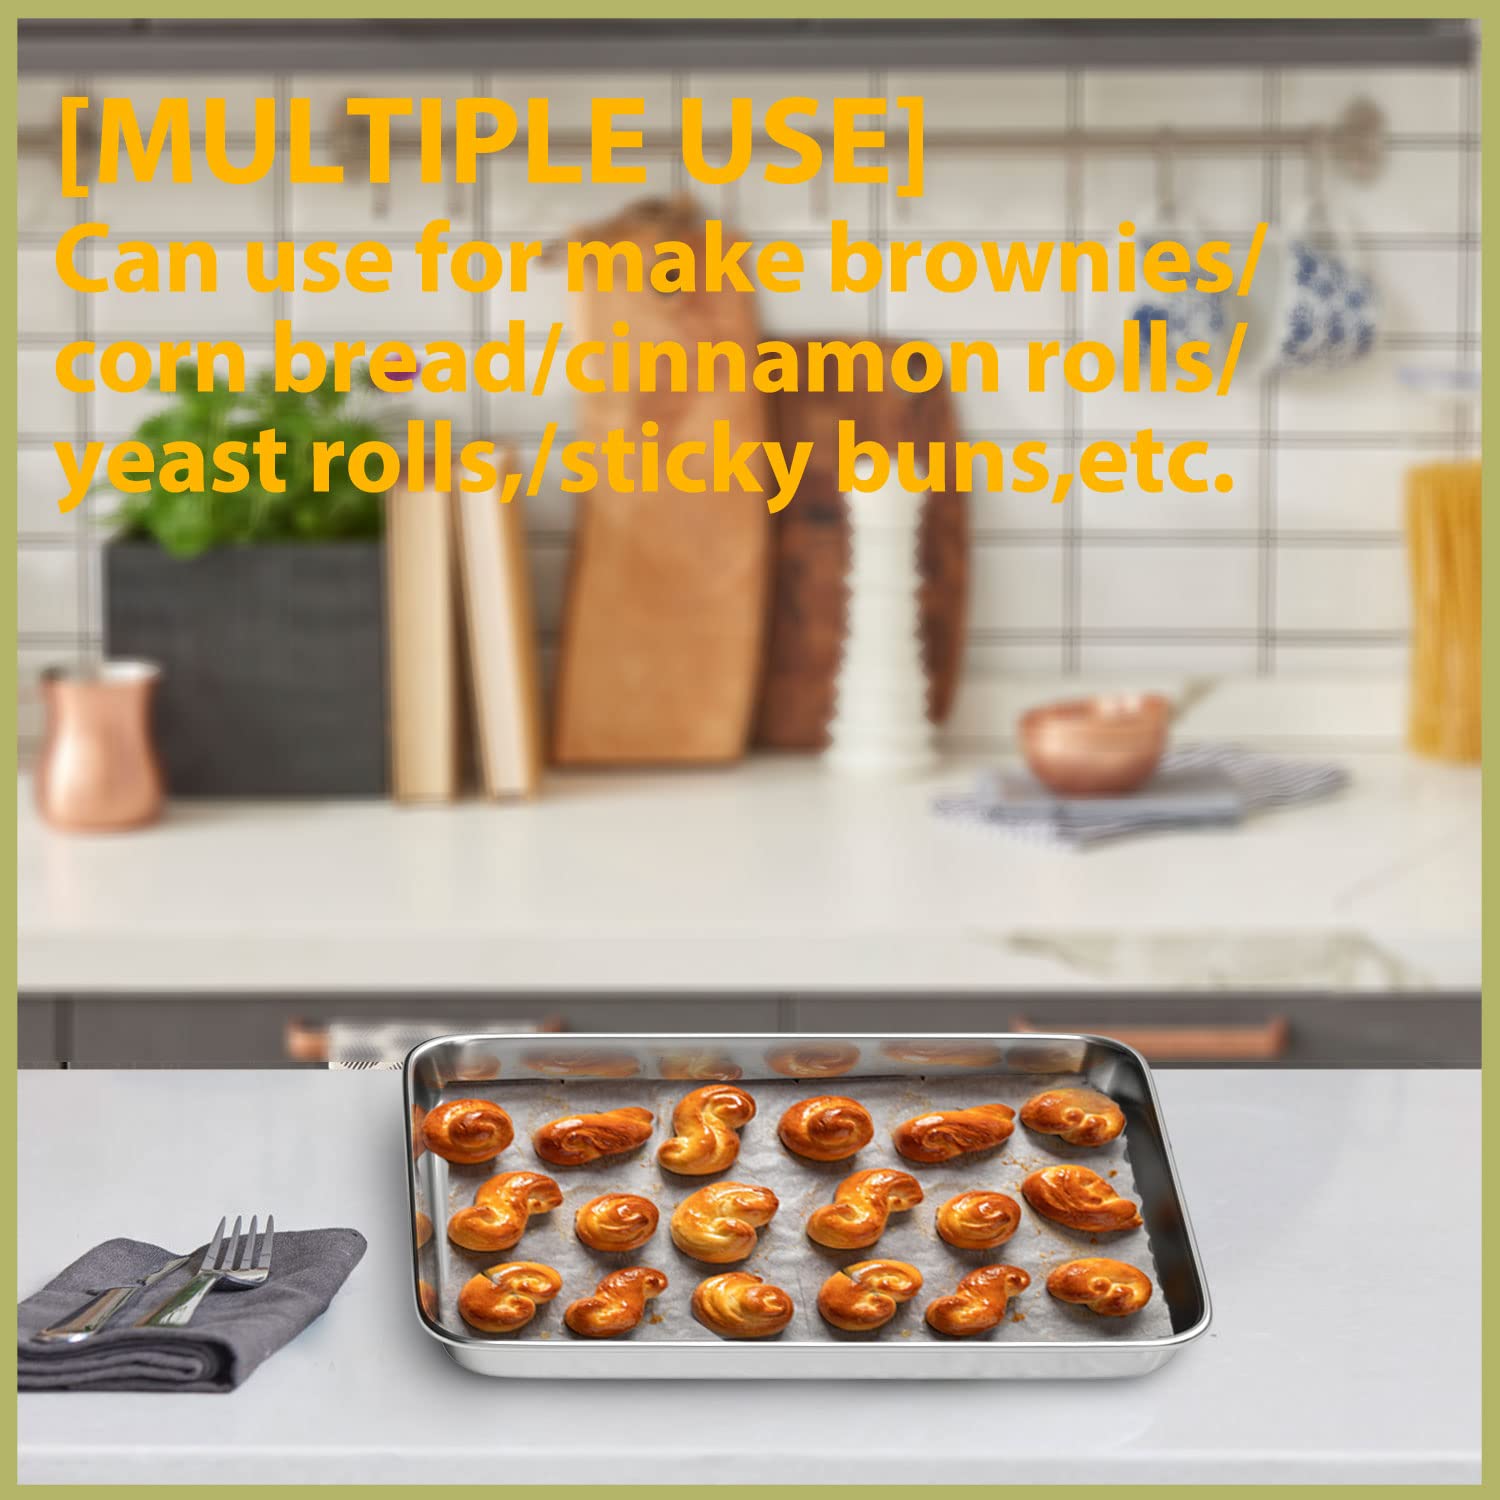 Baking Sheet Cookie Sheet Set of 2, Umite Chef Stainless Steel Baking Pans Tray Professional 16 x 12 x 1 inch, Non Toxic & Healthy, Mirror Finish & Rust Free, Easy Clean & Dishwasher Safe